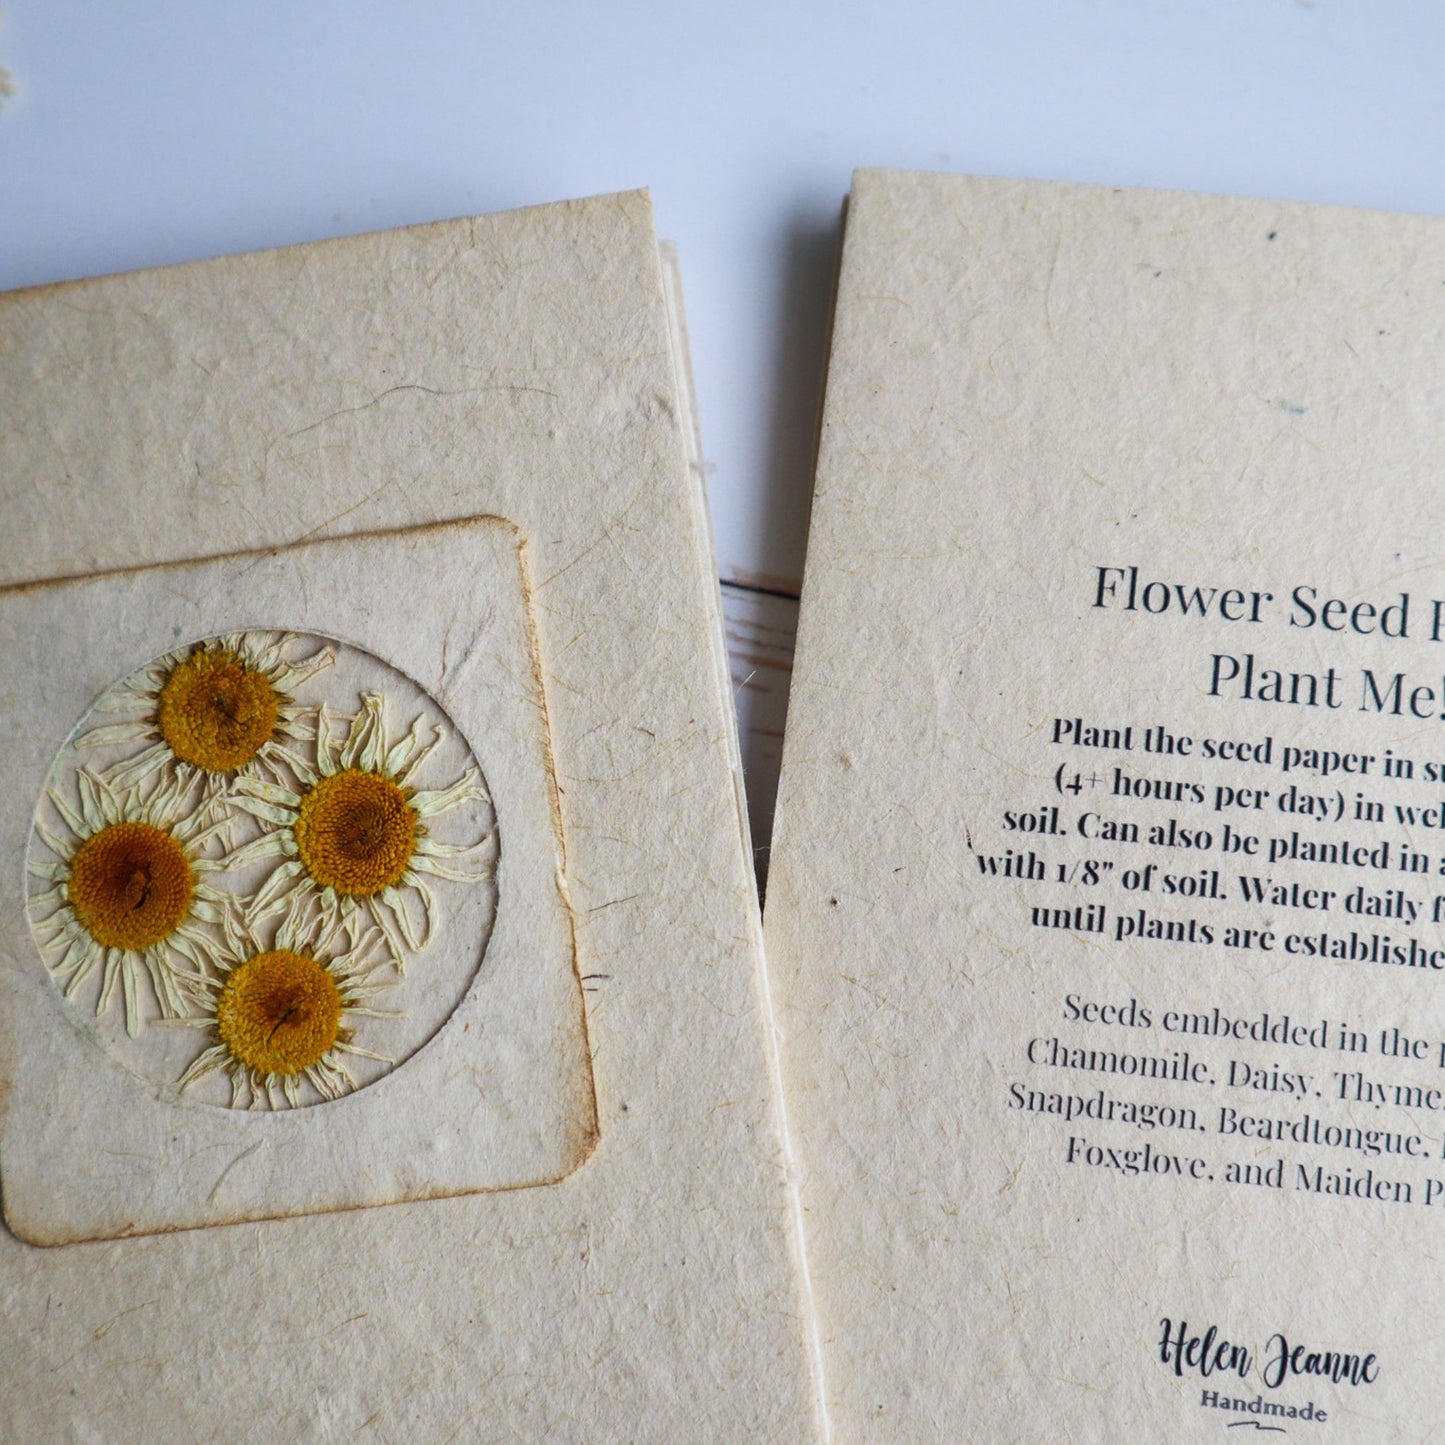 Helen Jeanne Handmade plantable seed paper journal with dried daisy type flowers on the cover and tied with biodegradable hemp cord with planting instructions.